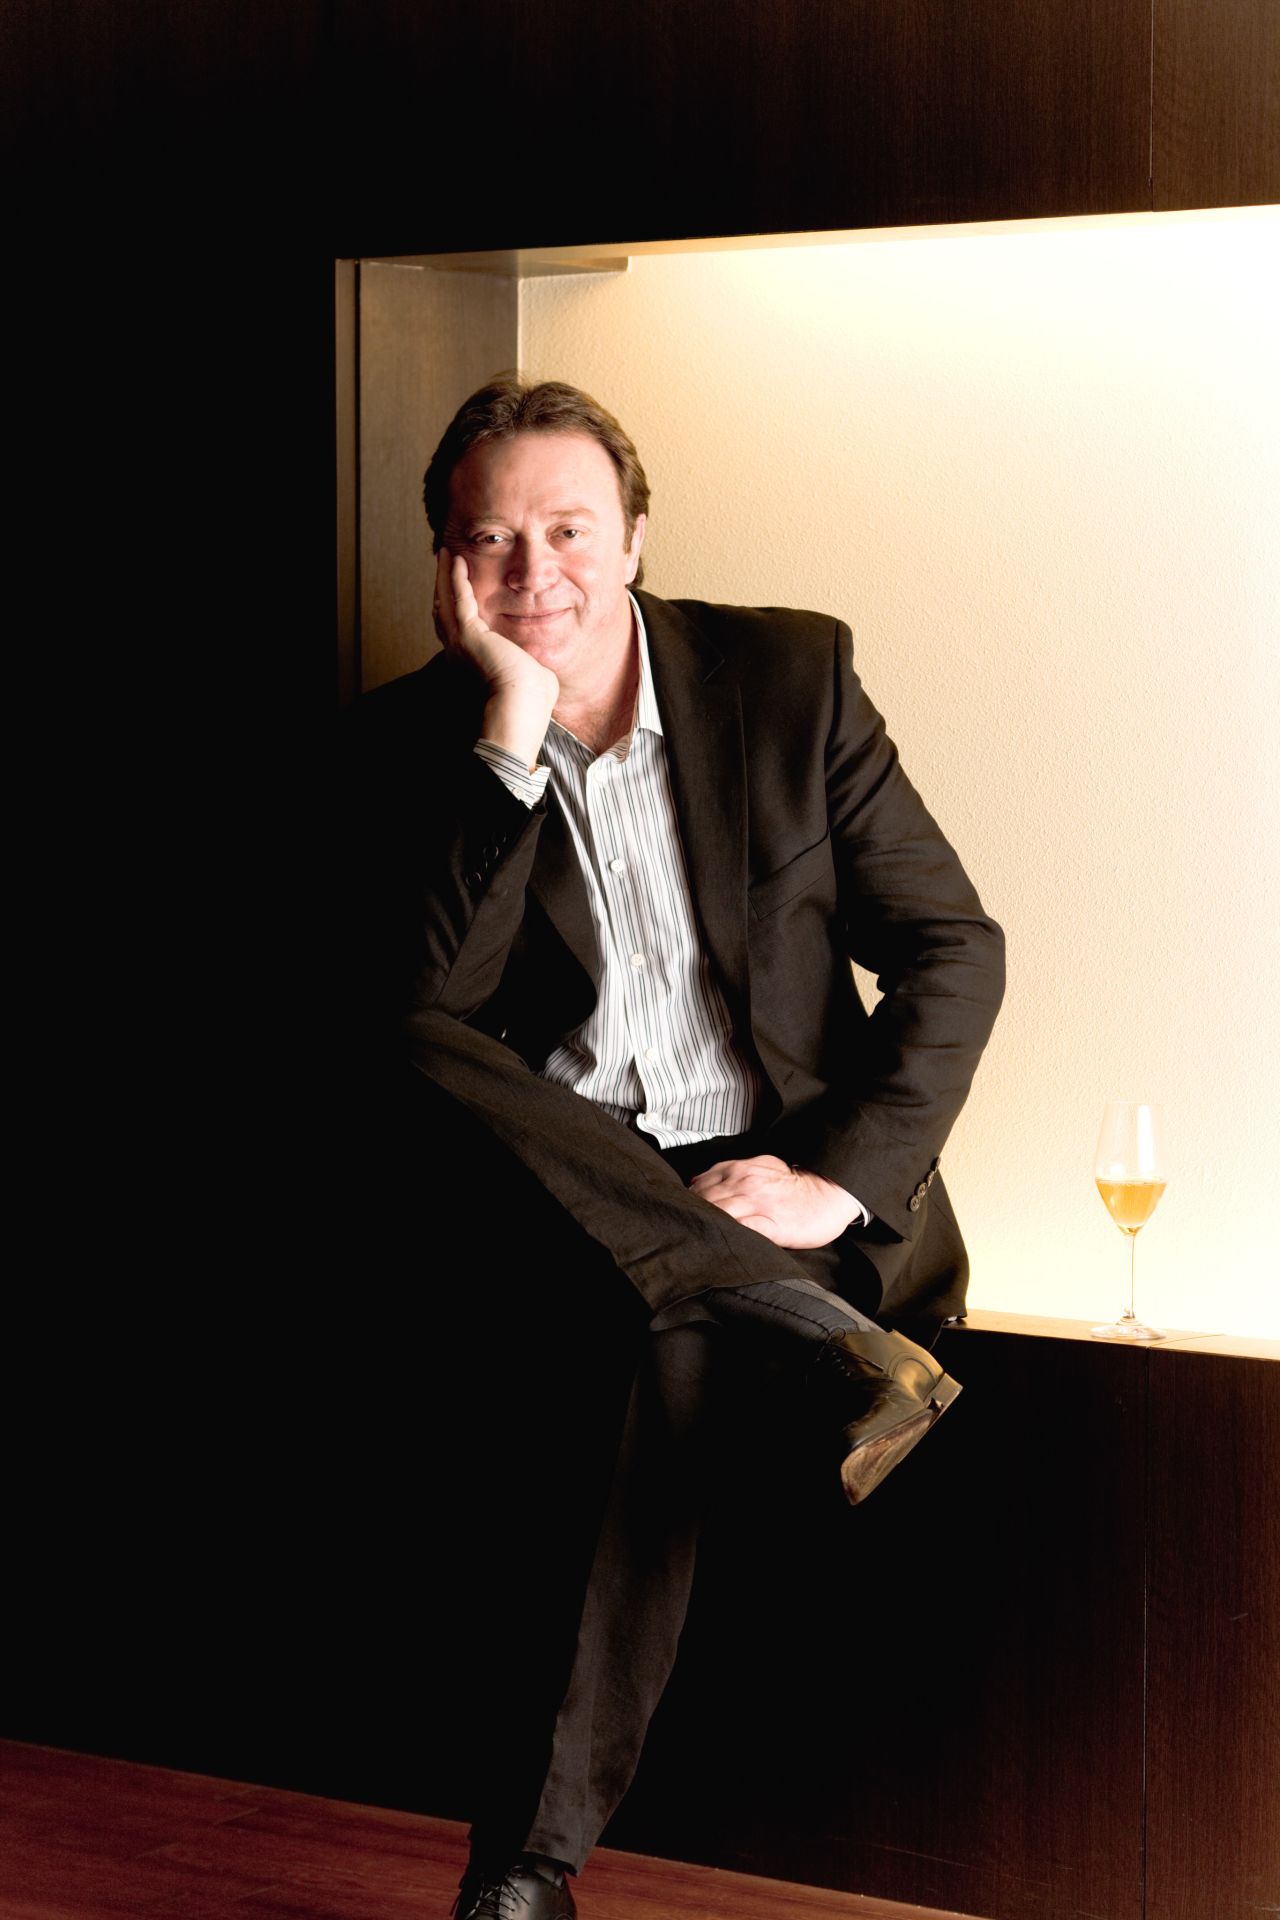 Claude Giraud, of Champagne Henri Giraud, says making good champagne requires a "good economic climate."